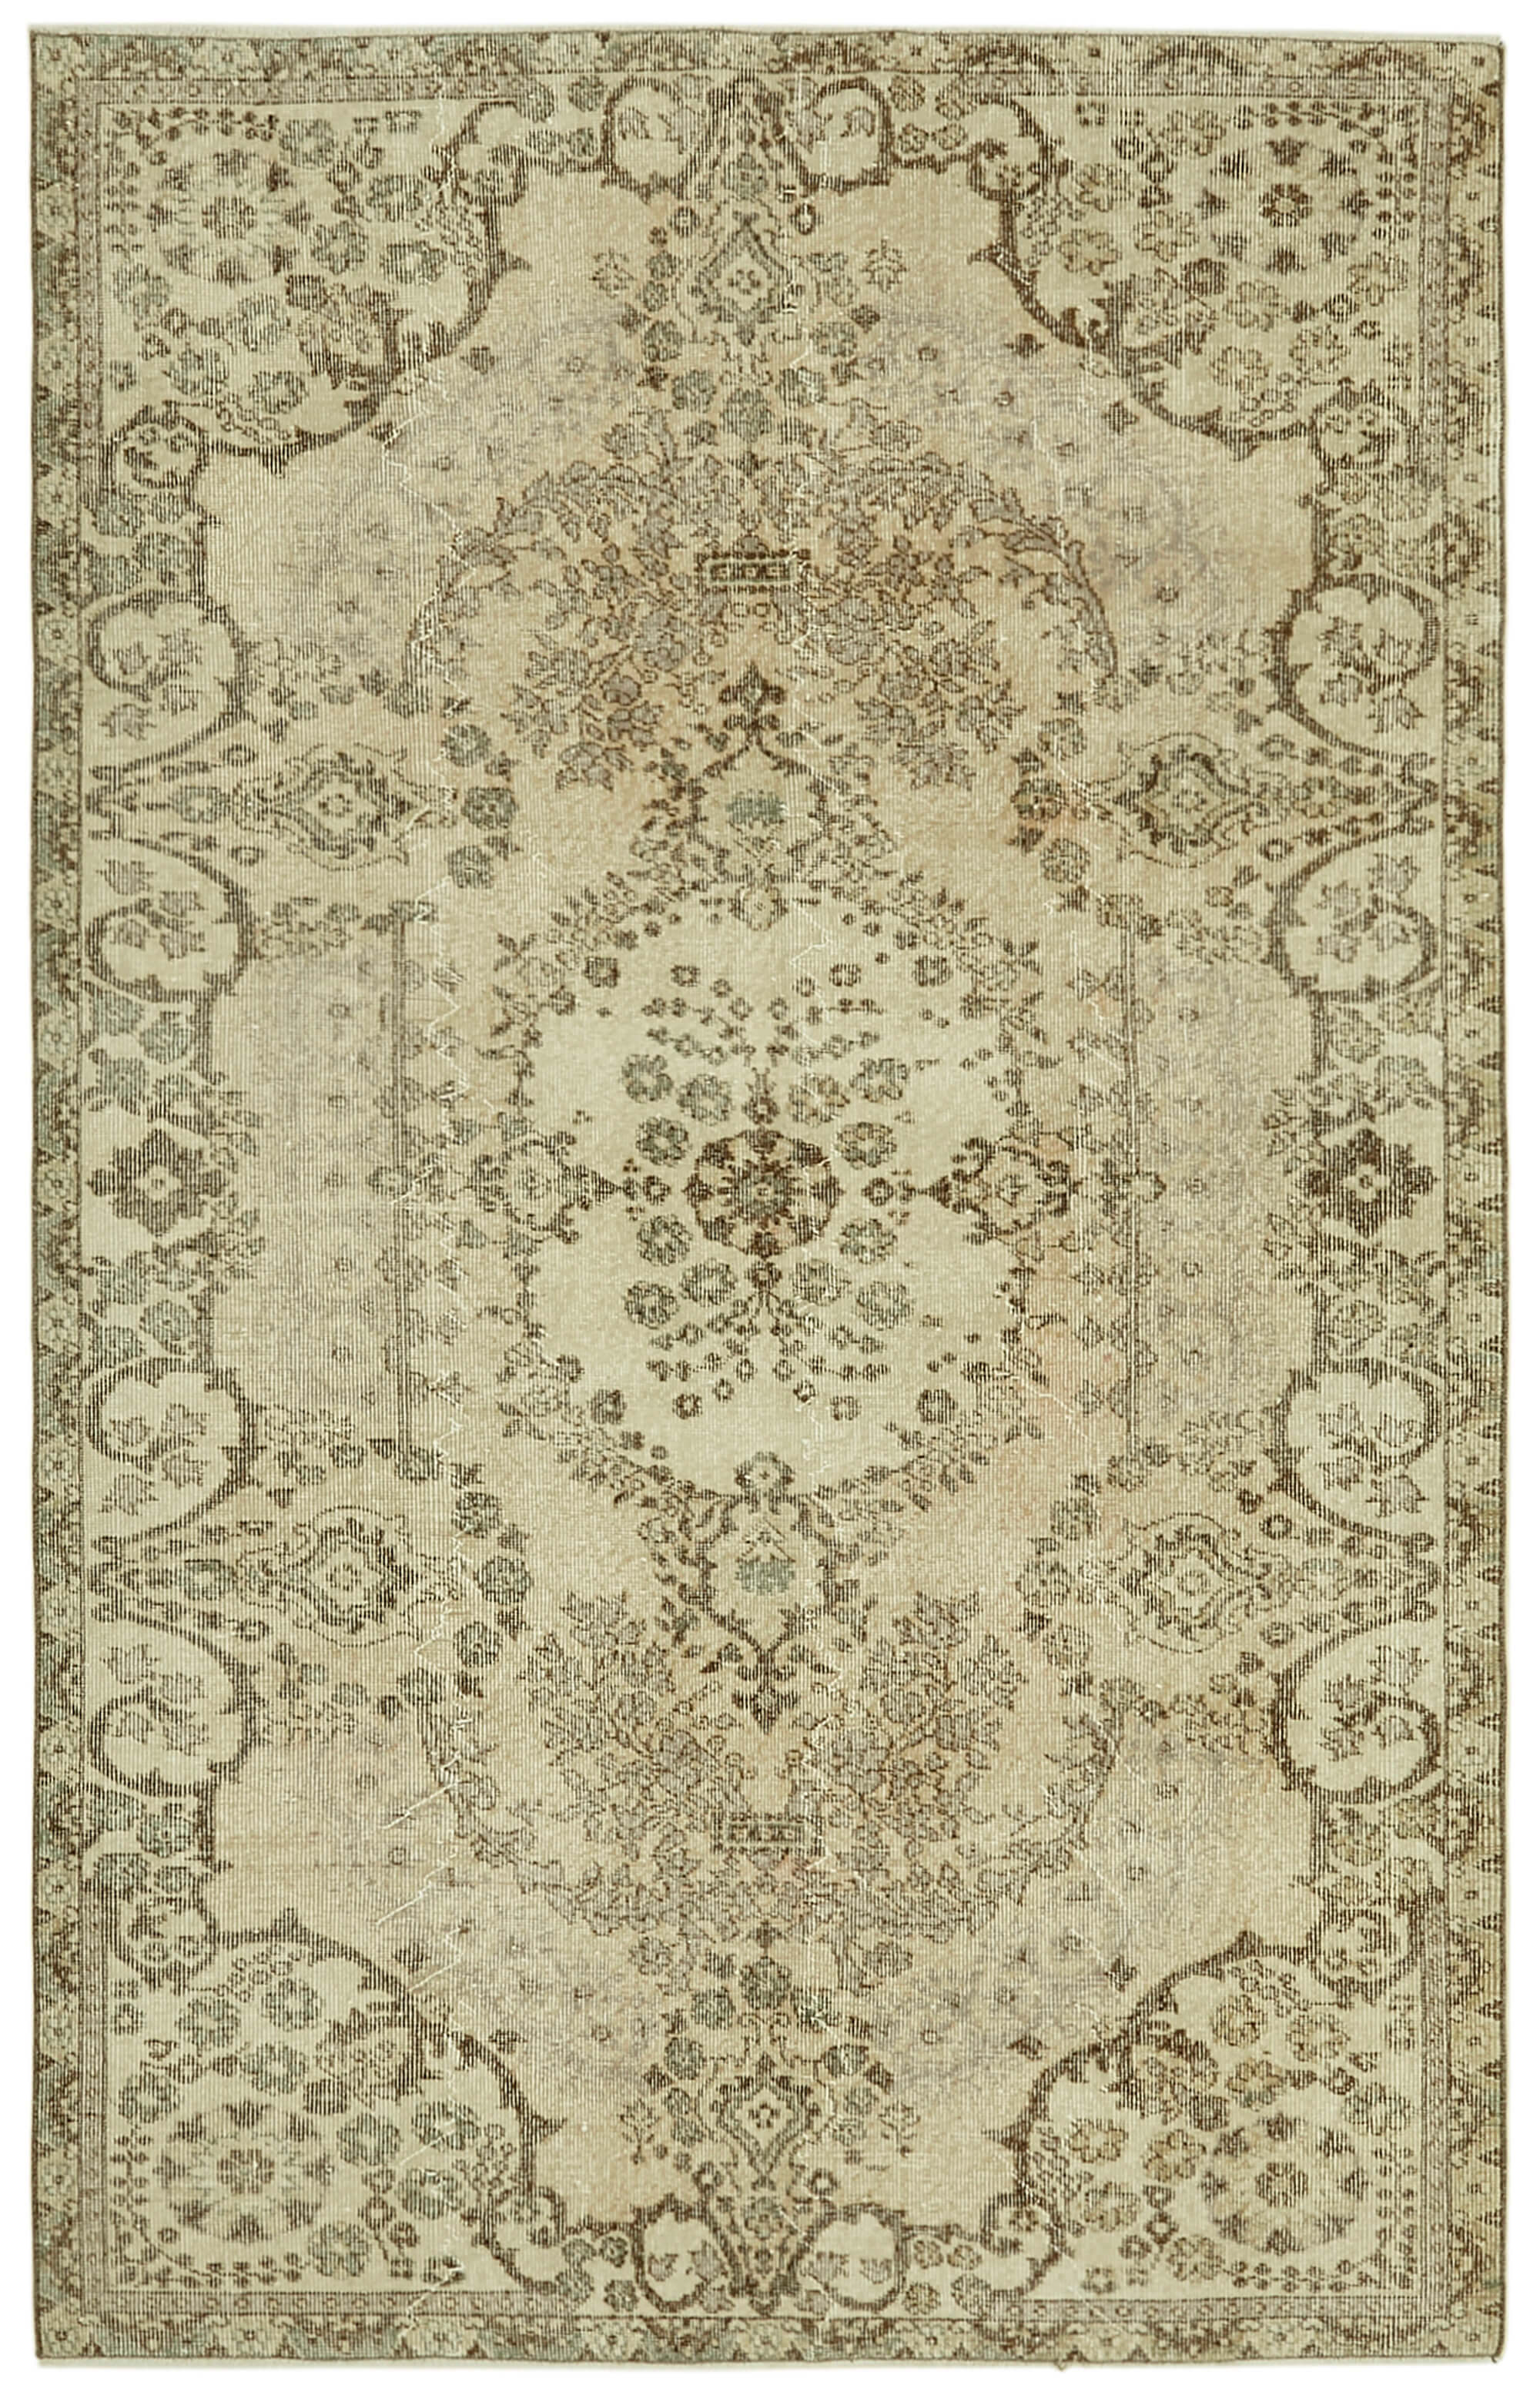 Handmade White Wash Area Rug > Design# OL-AC-41643 > Size: 5'-6" x 8'-10", Carpet Culture Rugs, Handmade Rugs, NYC Rugs, New Rugs, Shop Rugs, Rug Store, Outlet Rugs, SoHo Rugs, Rugs in USA